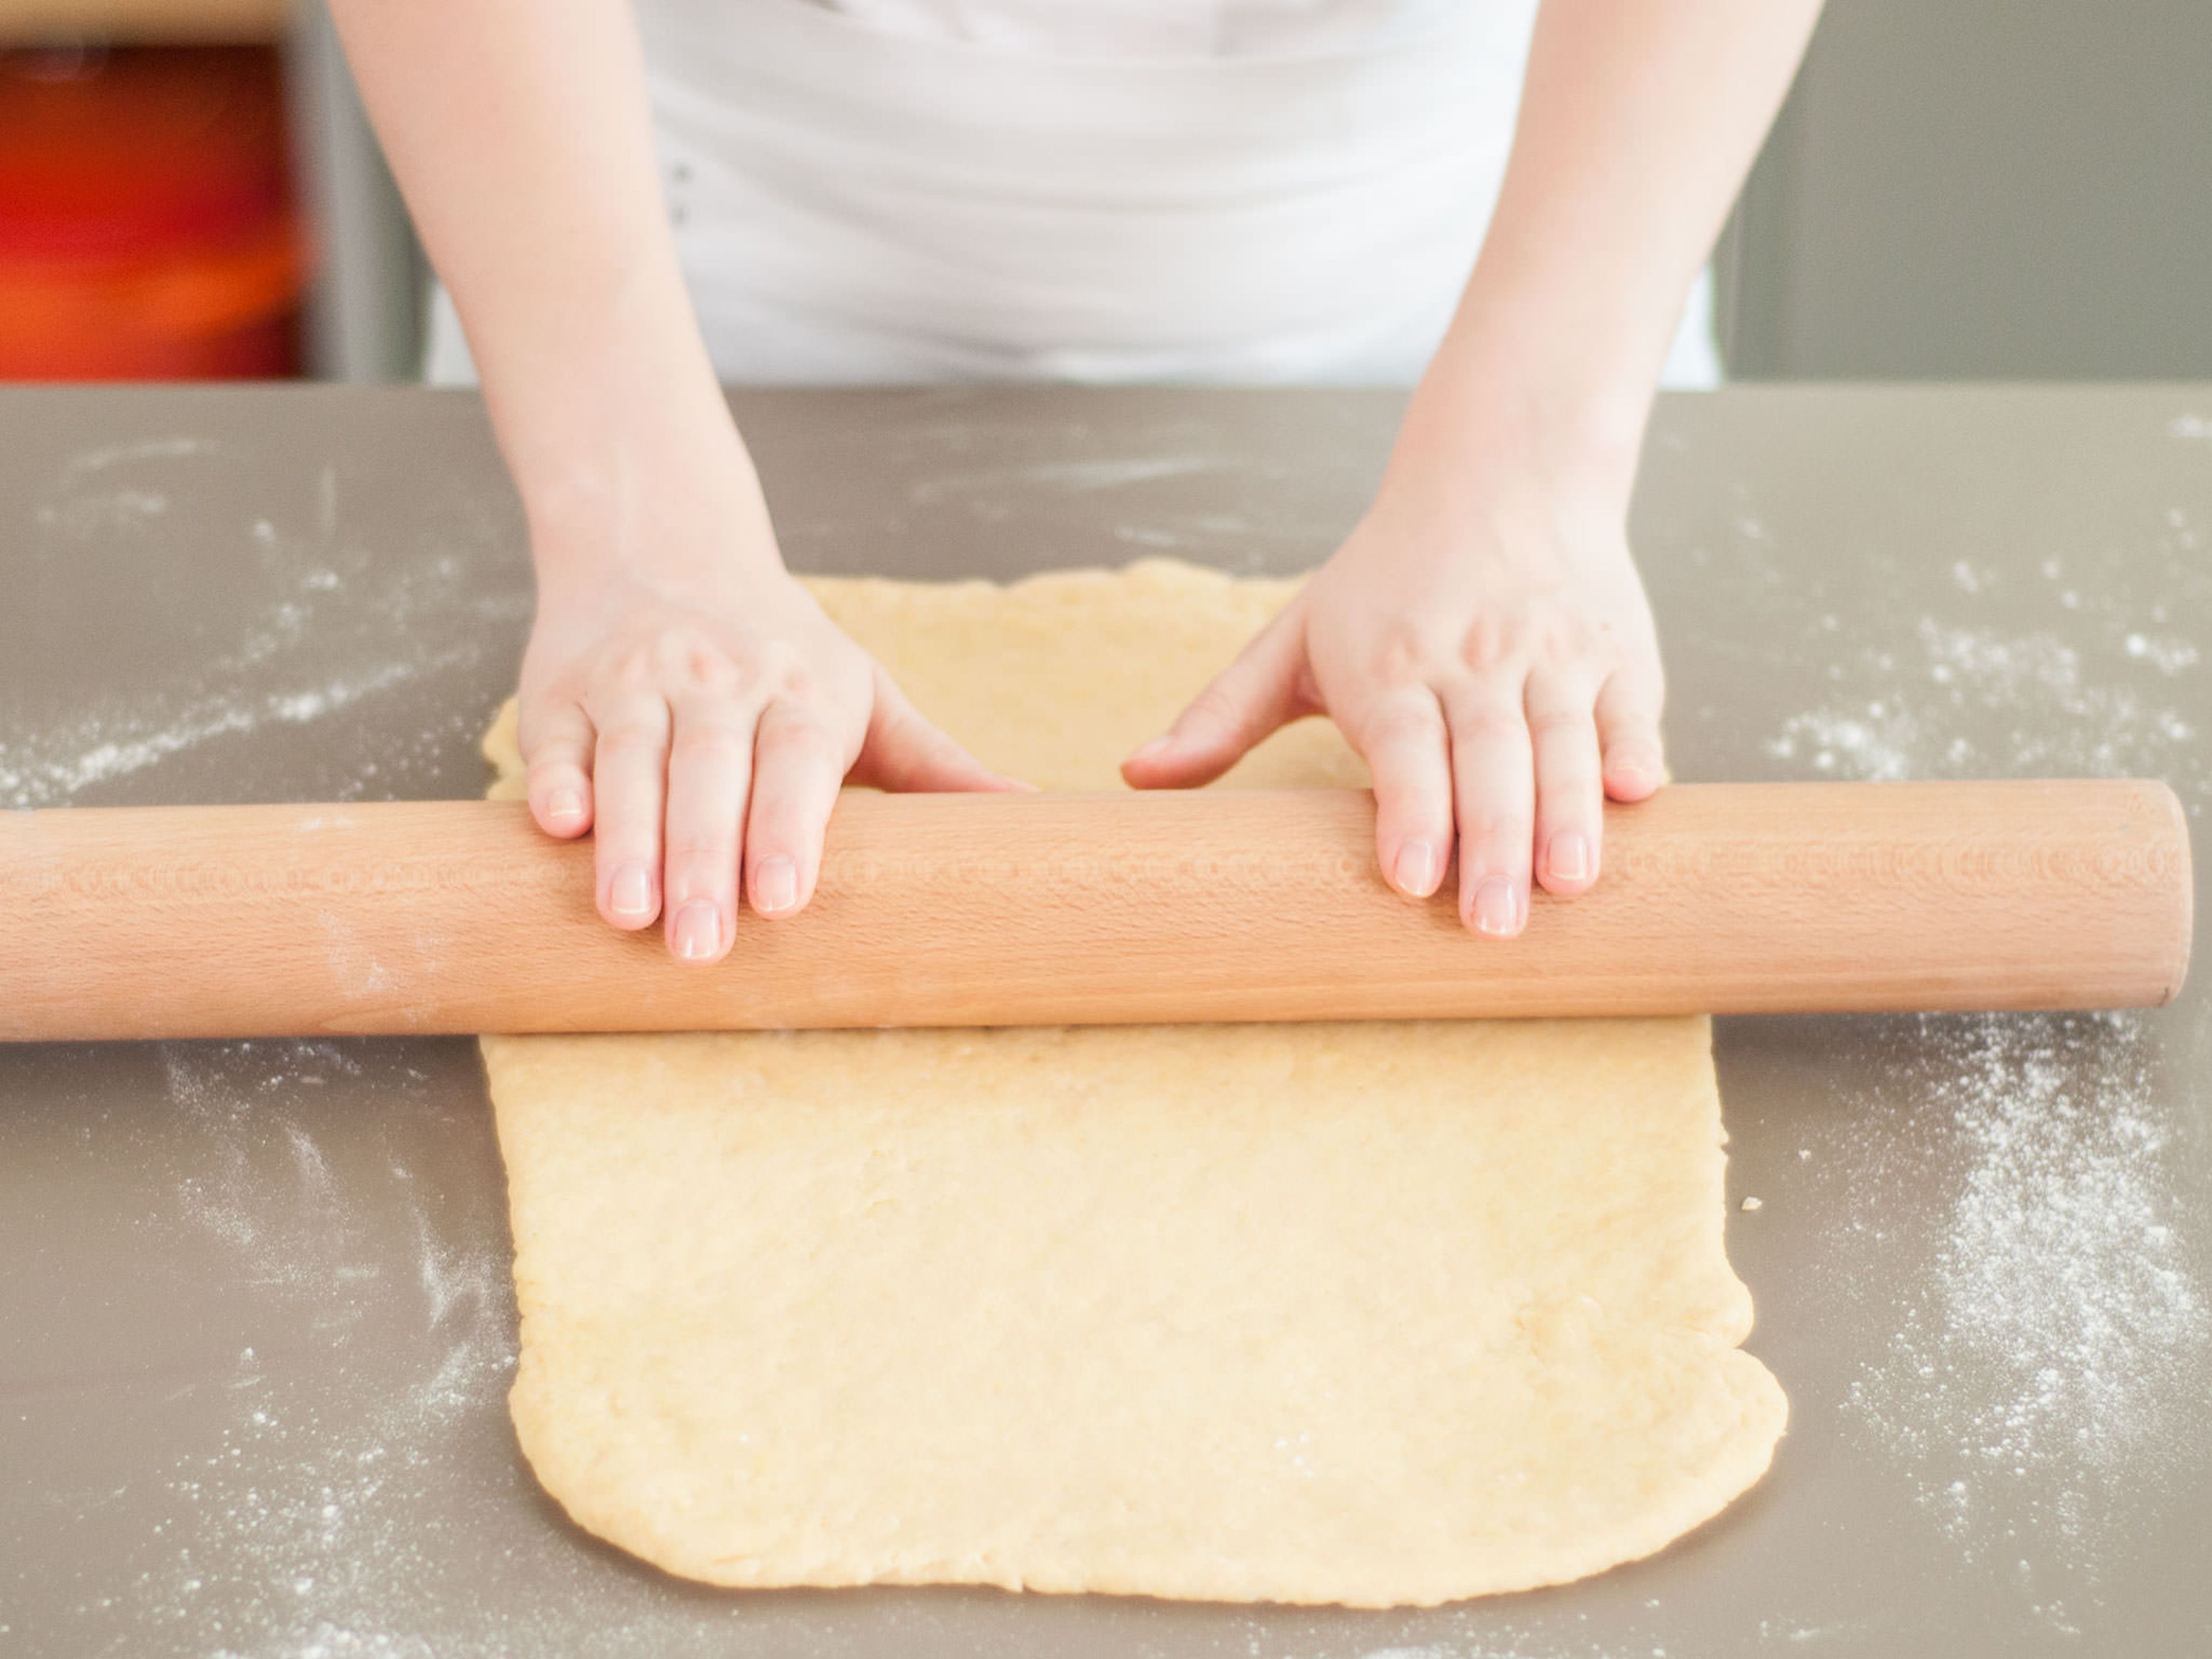 Mix together cinnamon, nutmeg, and some of the sugar. Grease a large rectangular baking dish with butter. Preheat oven to 180°C/350°F. Turn dough out onto lightly floured surface, knead a couple of times until smooth, and roll out to fit the baking pan.